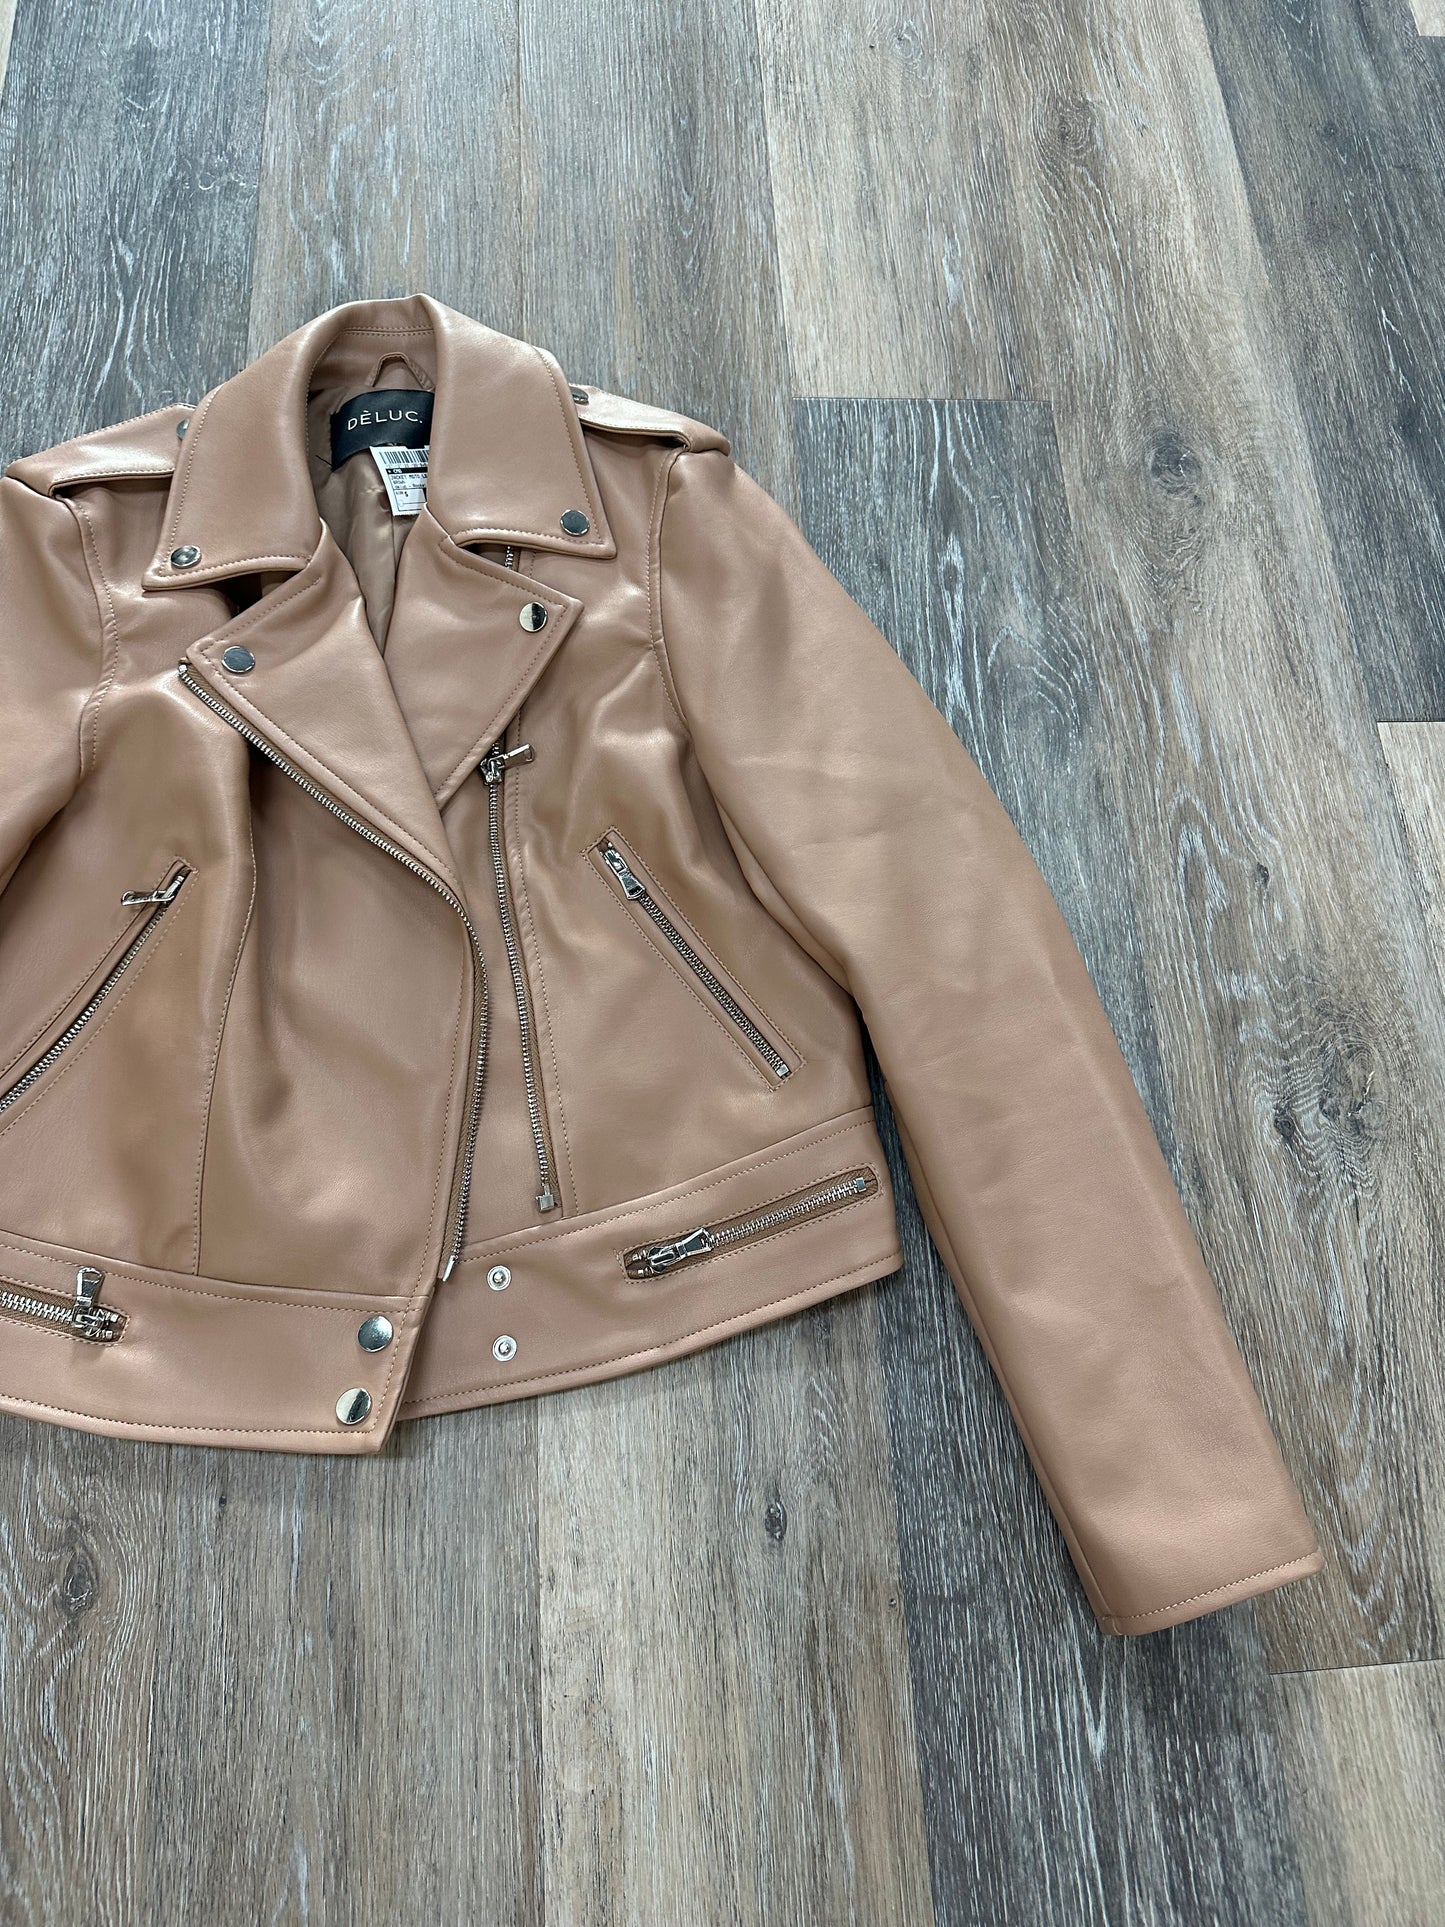 Jacket Moto Leather By Deluc  Size: S